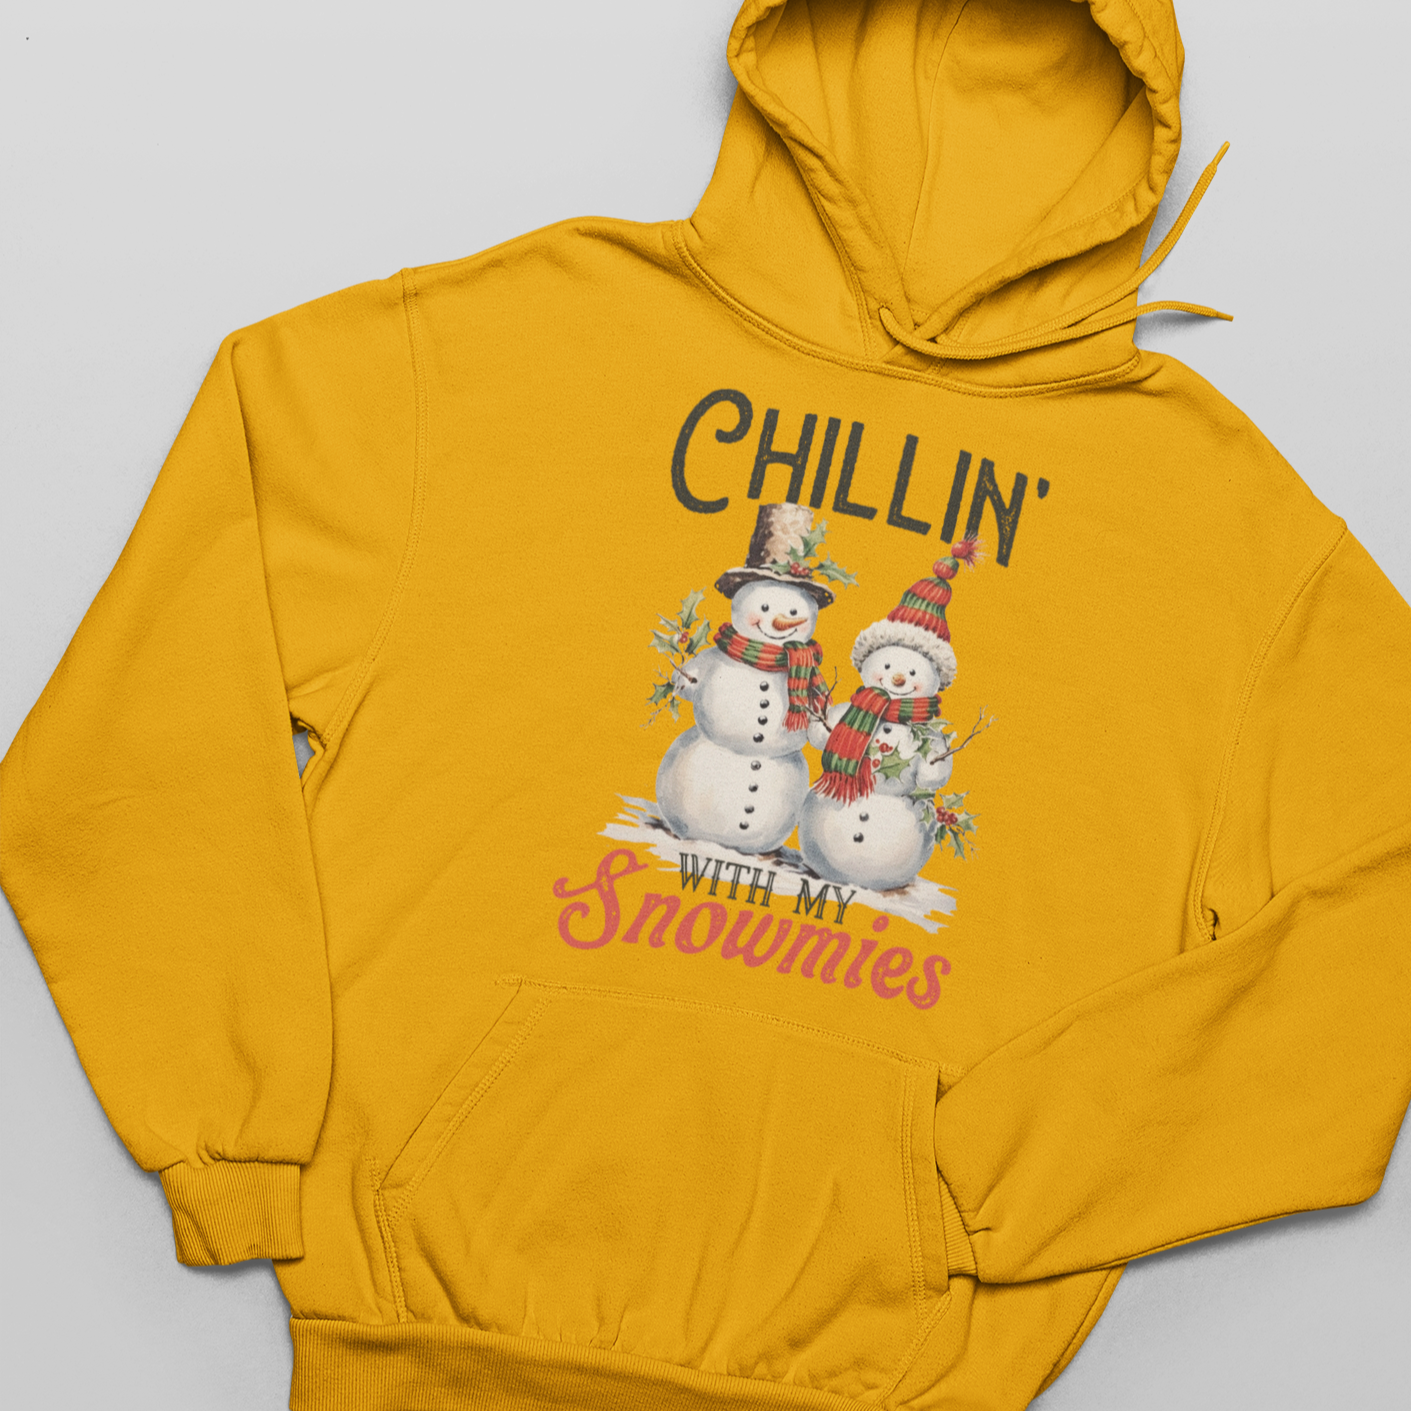 Chillin With My Snowmies, Christmas, Winter - Unisex Pullover Hoodie